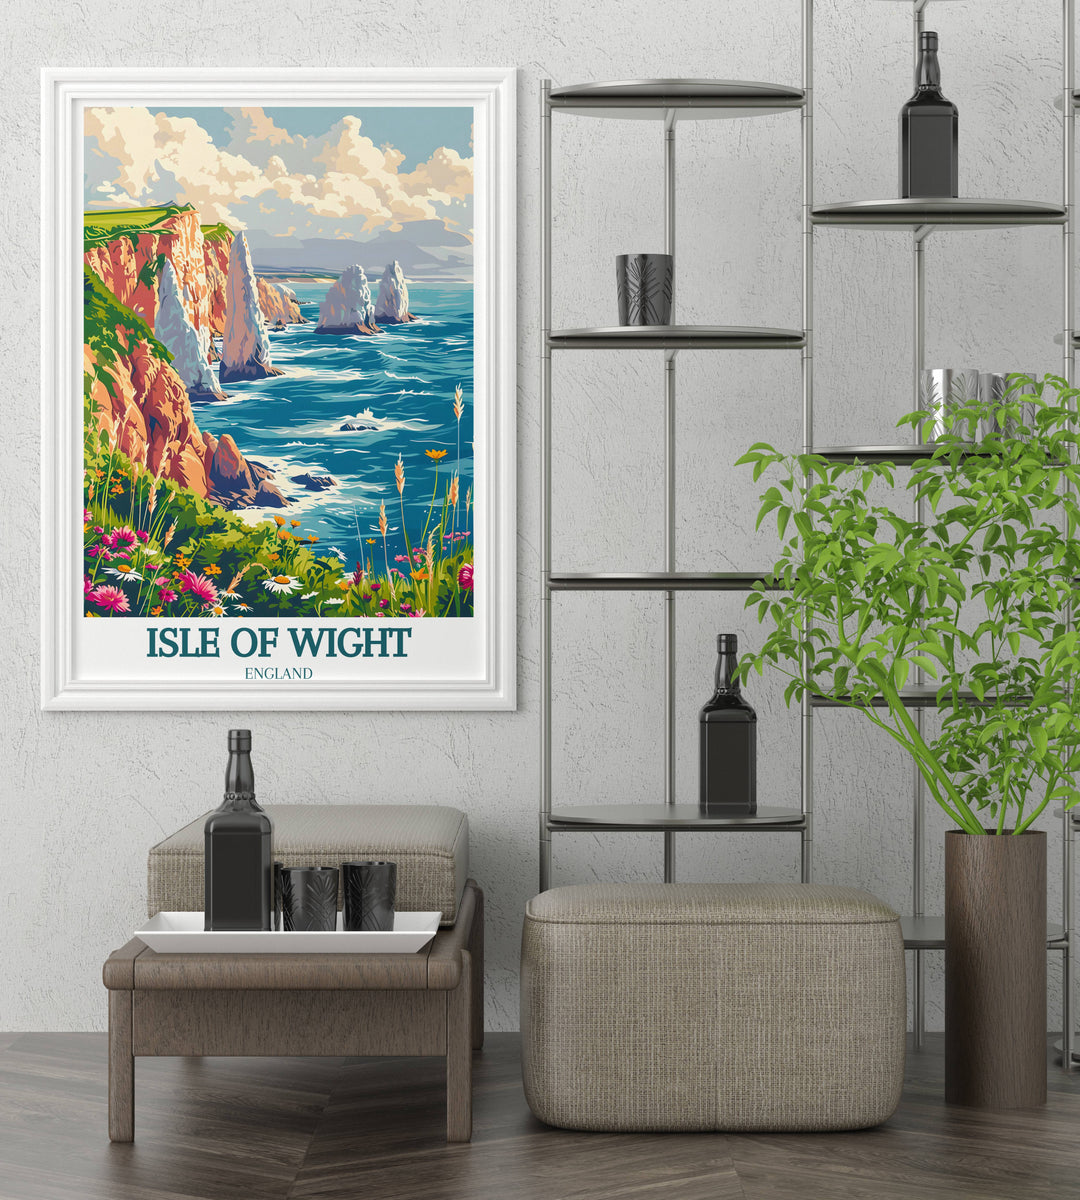 Abstract interpretation of The Needles Lighthouse using bold colors and expressive brush strokes to capture the emotional essence of the landmark, ideal for modern art enthusiasts.